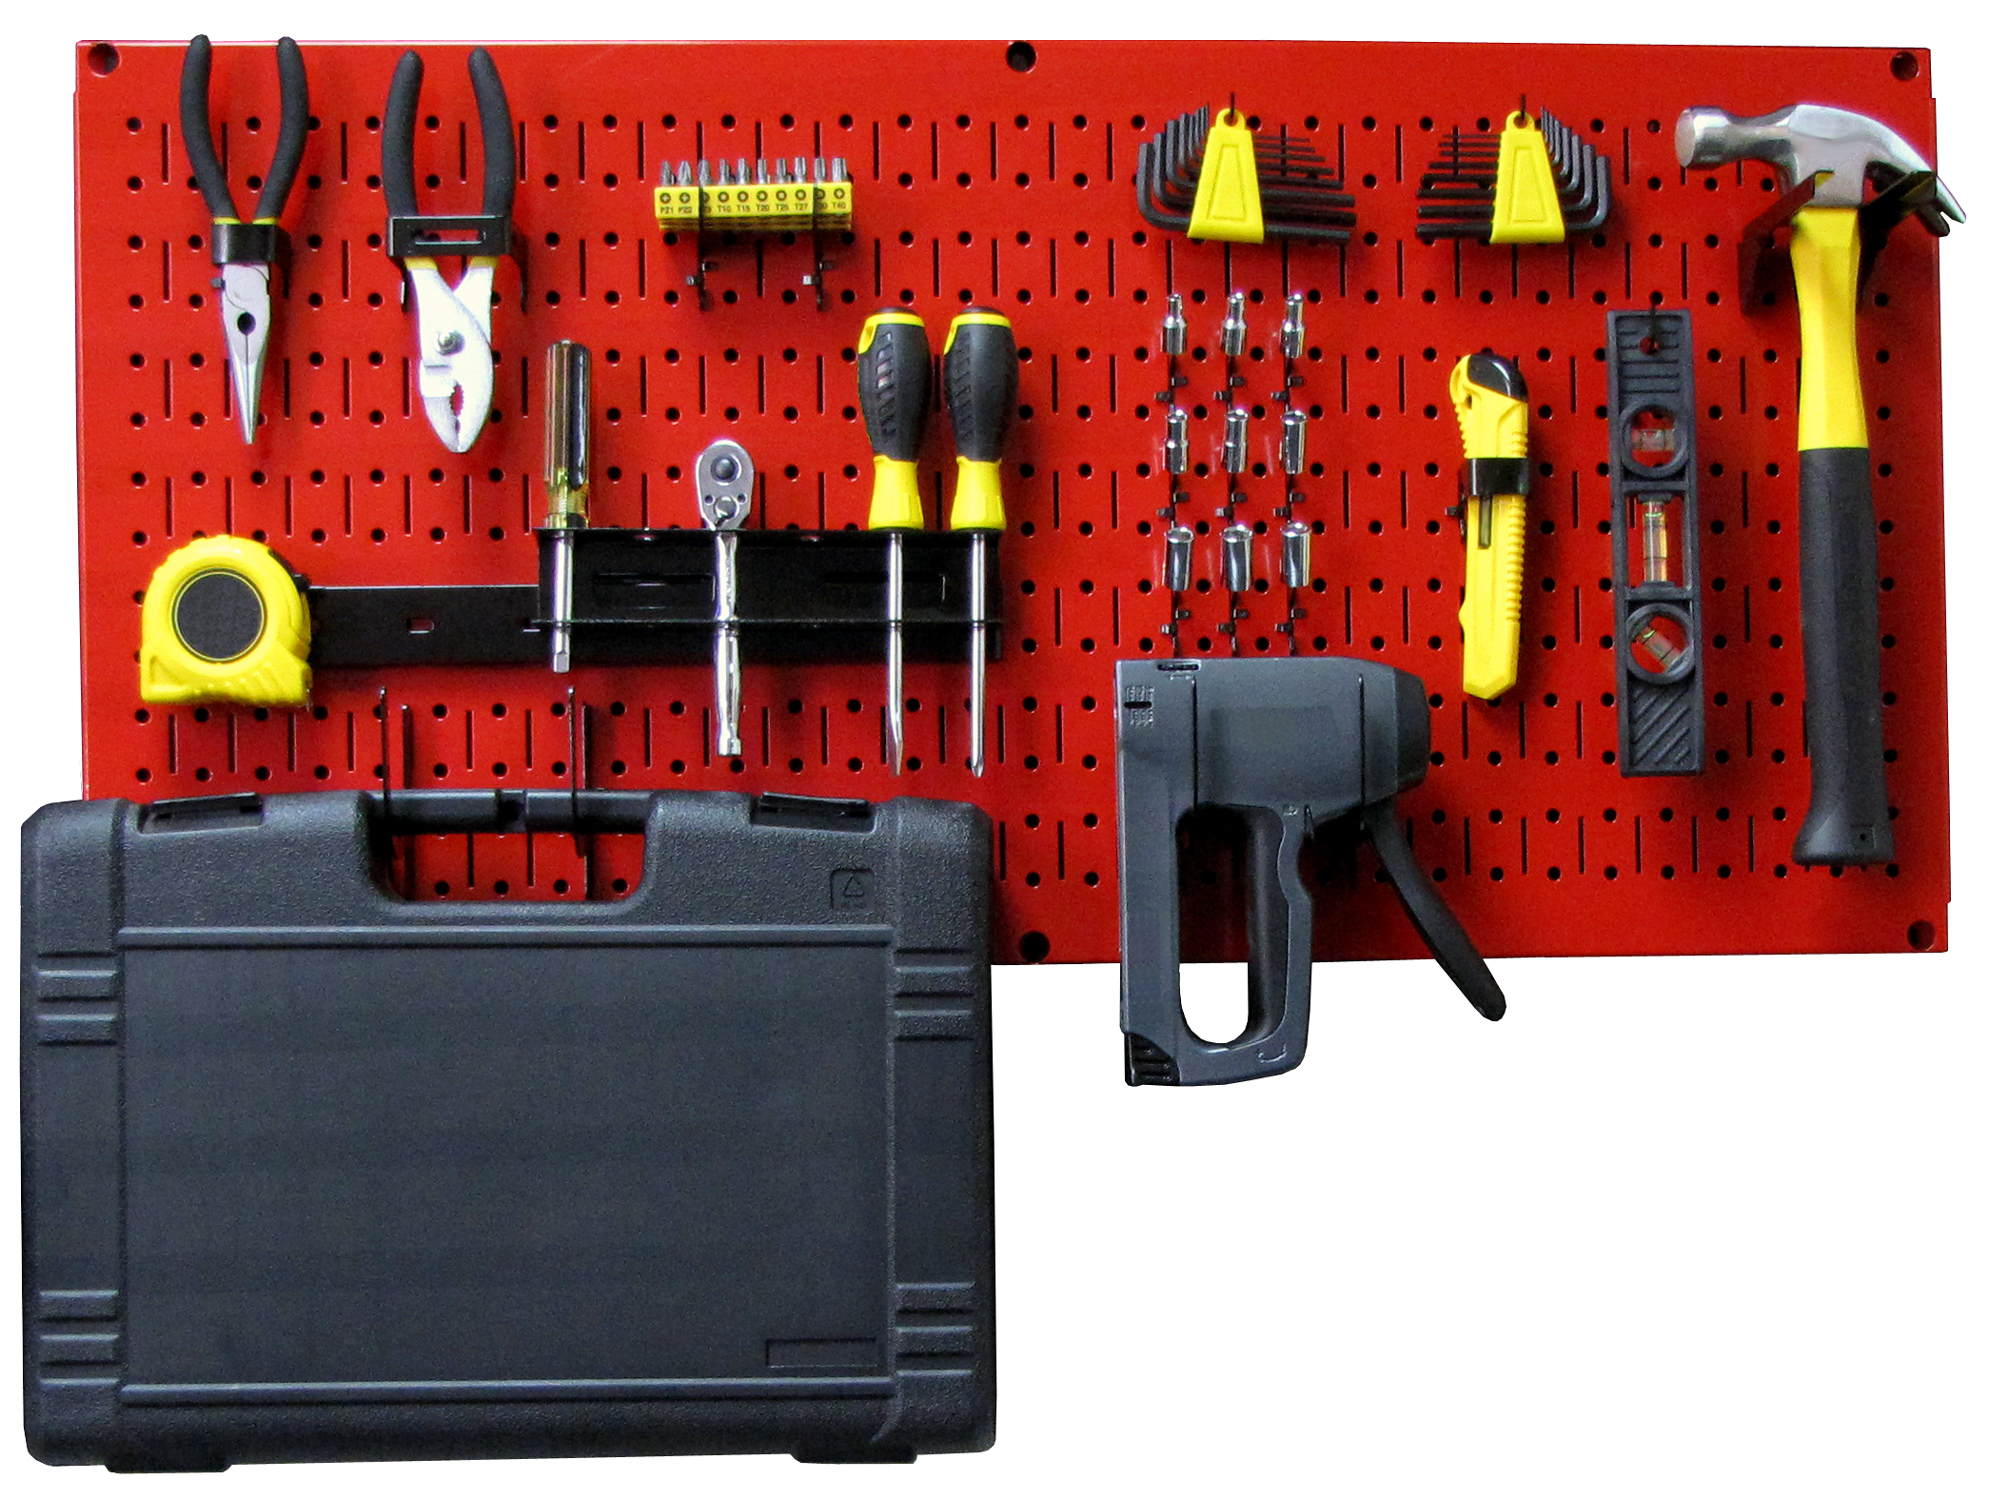 Wall Control Modular Pegboard Tool Organizer System - Wall-Mounted Metal Peg Board Tool Storage Unit for Pegboard Tiling (Red Pegboard) - image 1 of 9